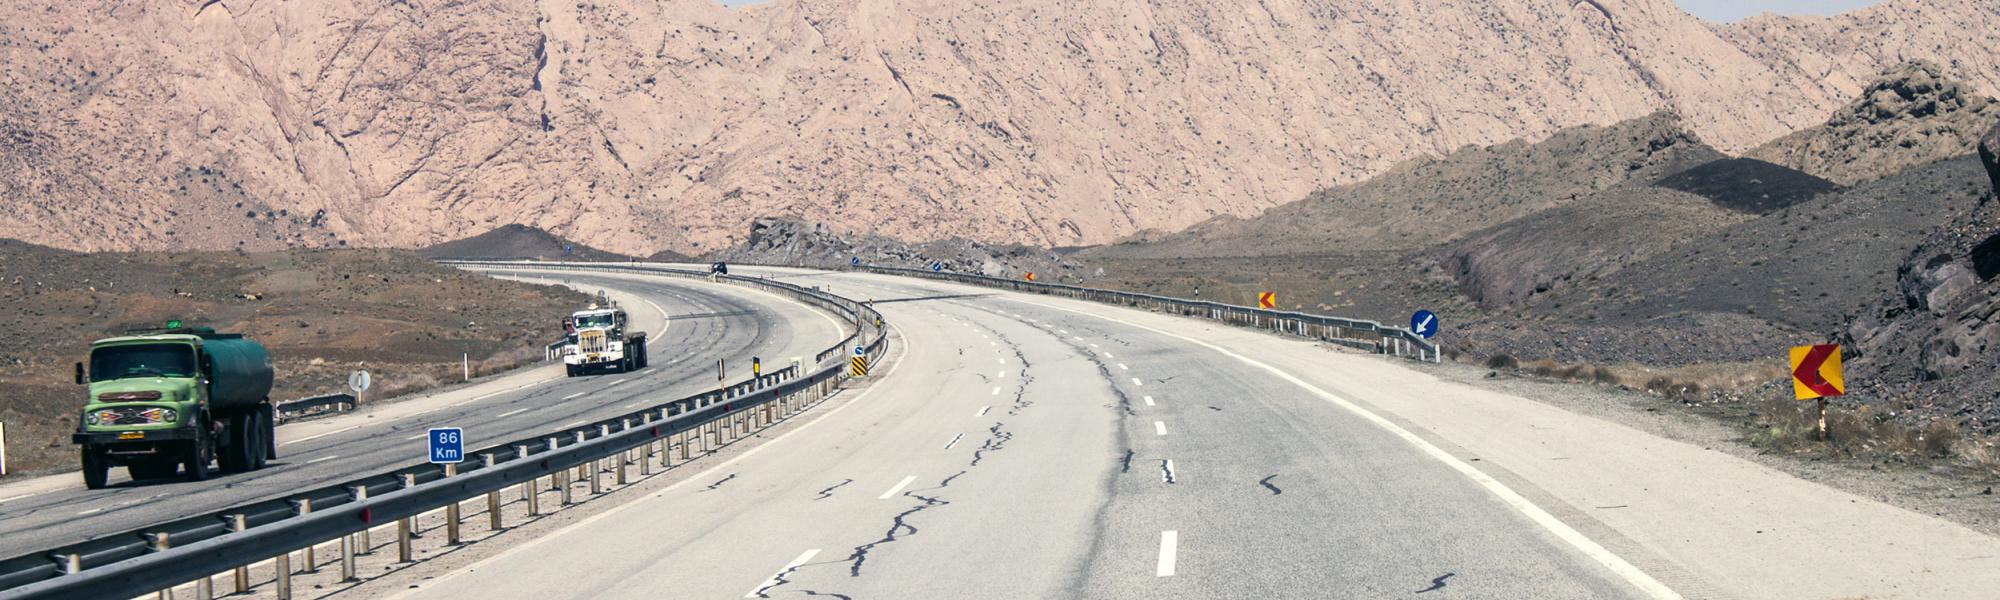 road near Tehran with trucks and road signs